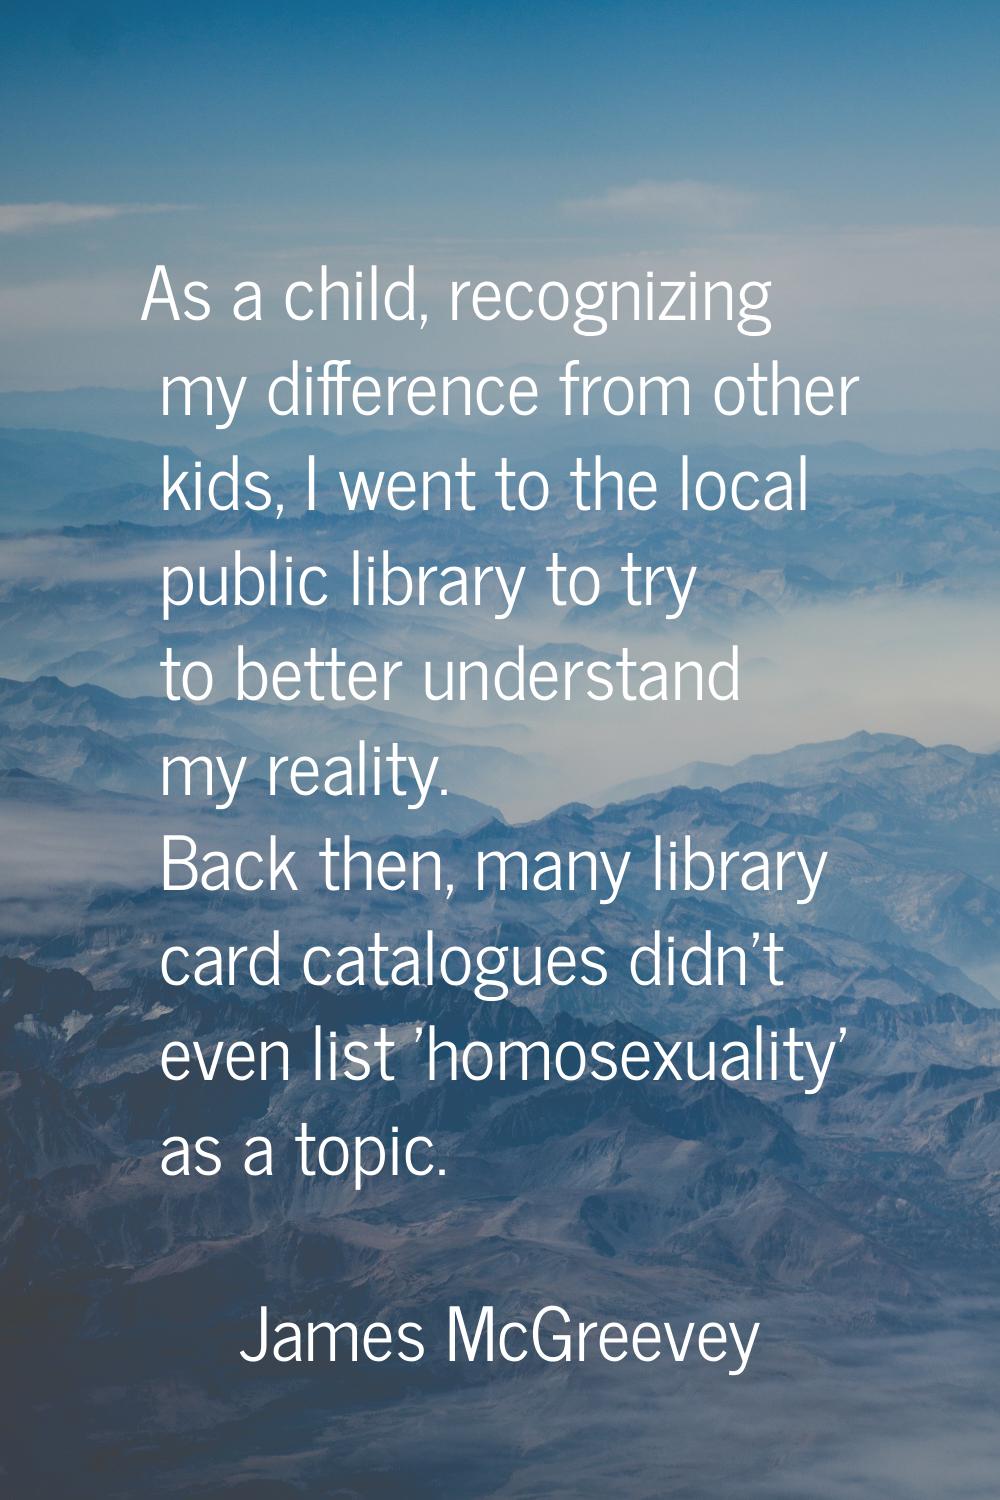 As a child, recognizing my difference from other kids, I went to the local public library to try to